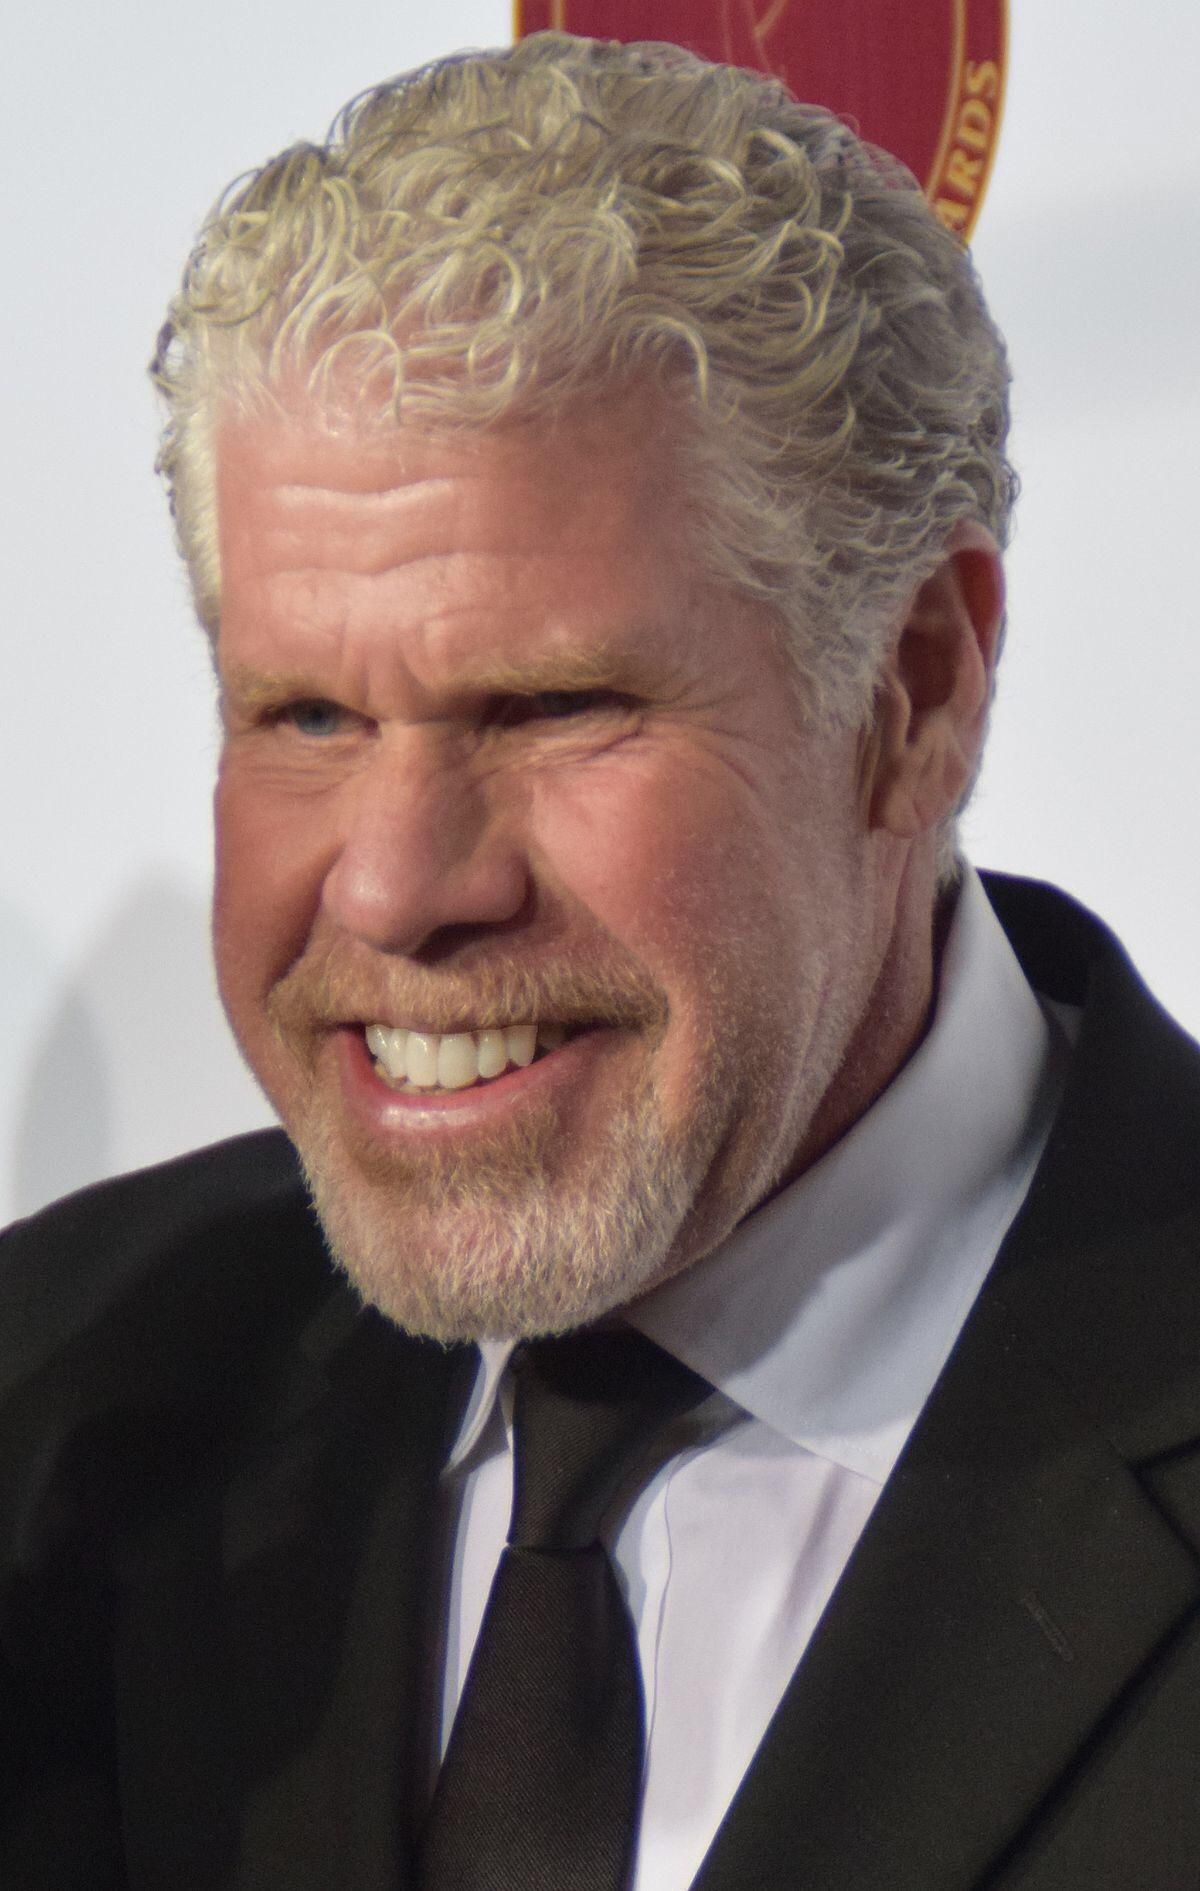 Ron Perlman looks like the lovechild of Will Ferrell and Gary Busey